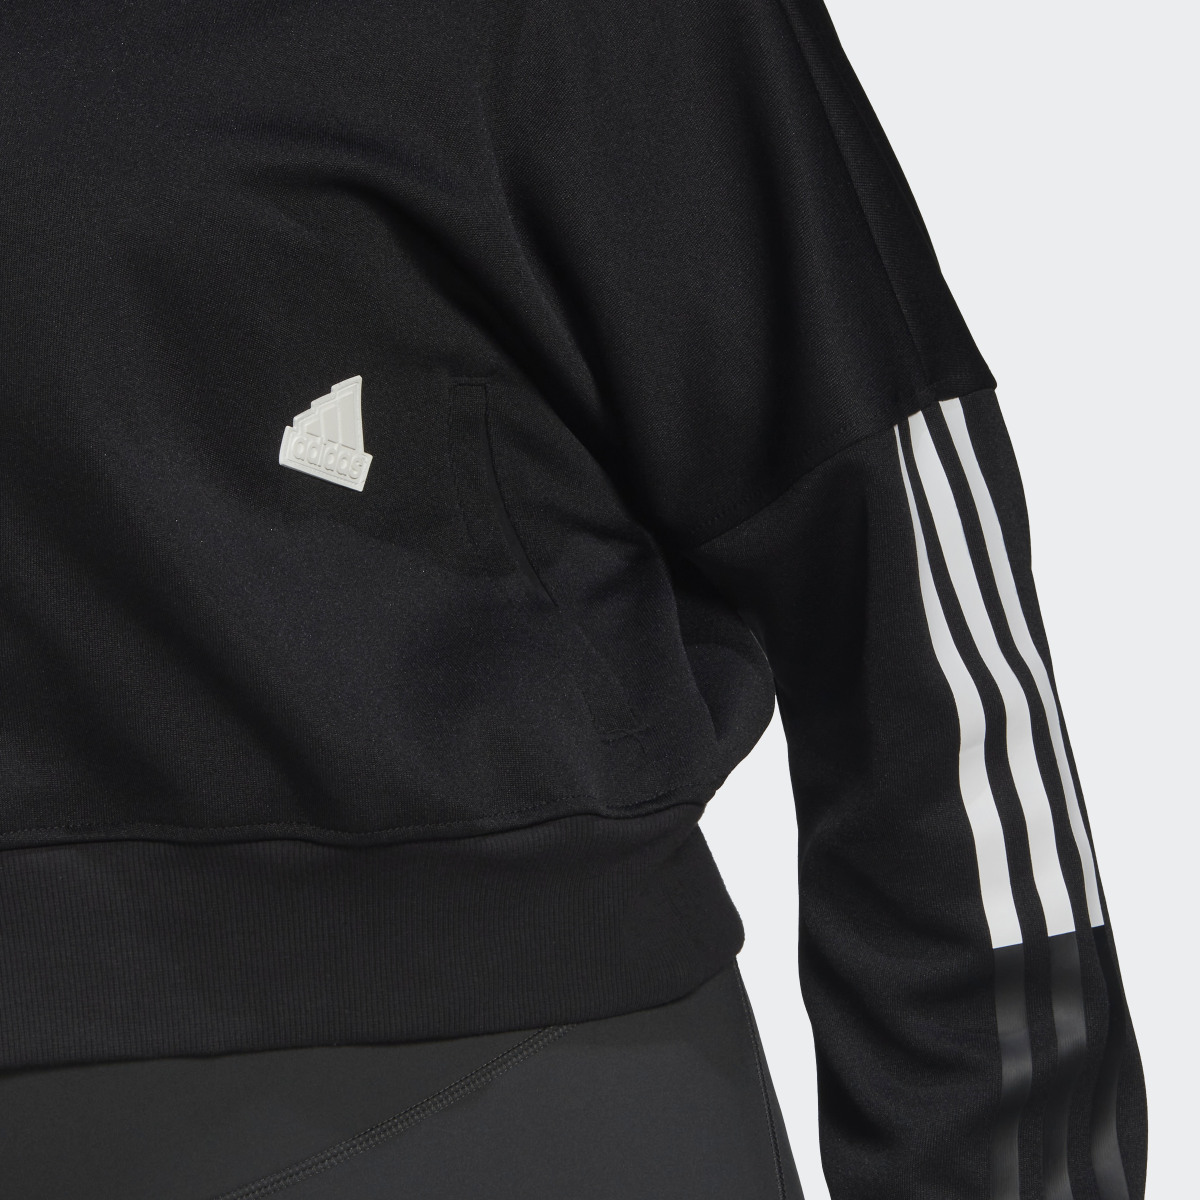 Adidas Cropped Track Top (Plus Size). 9